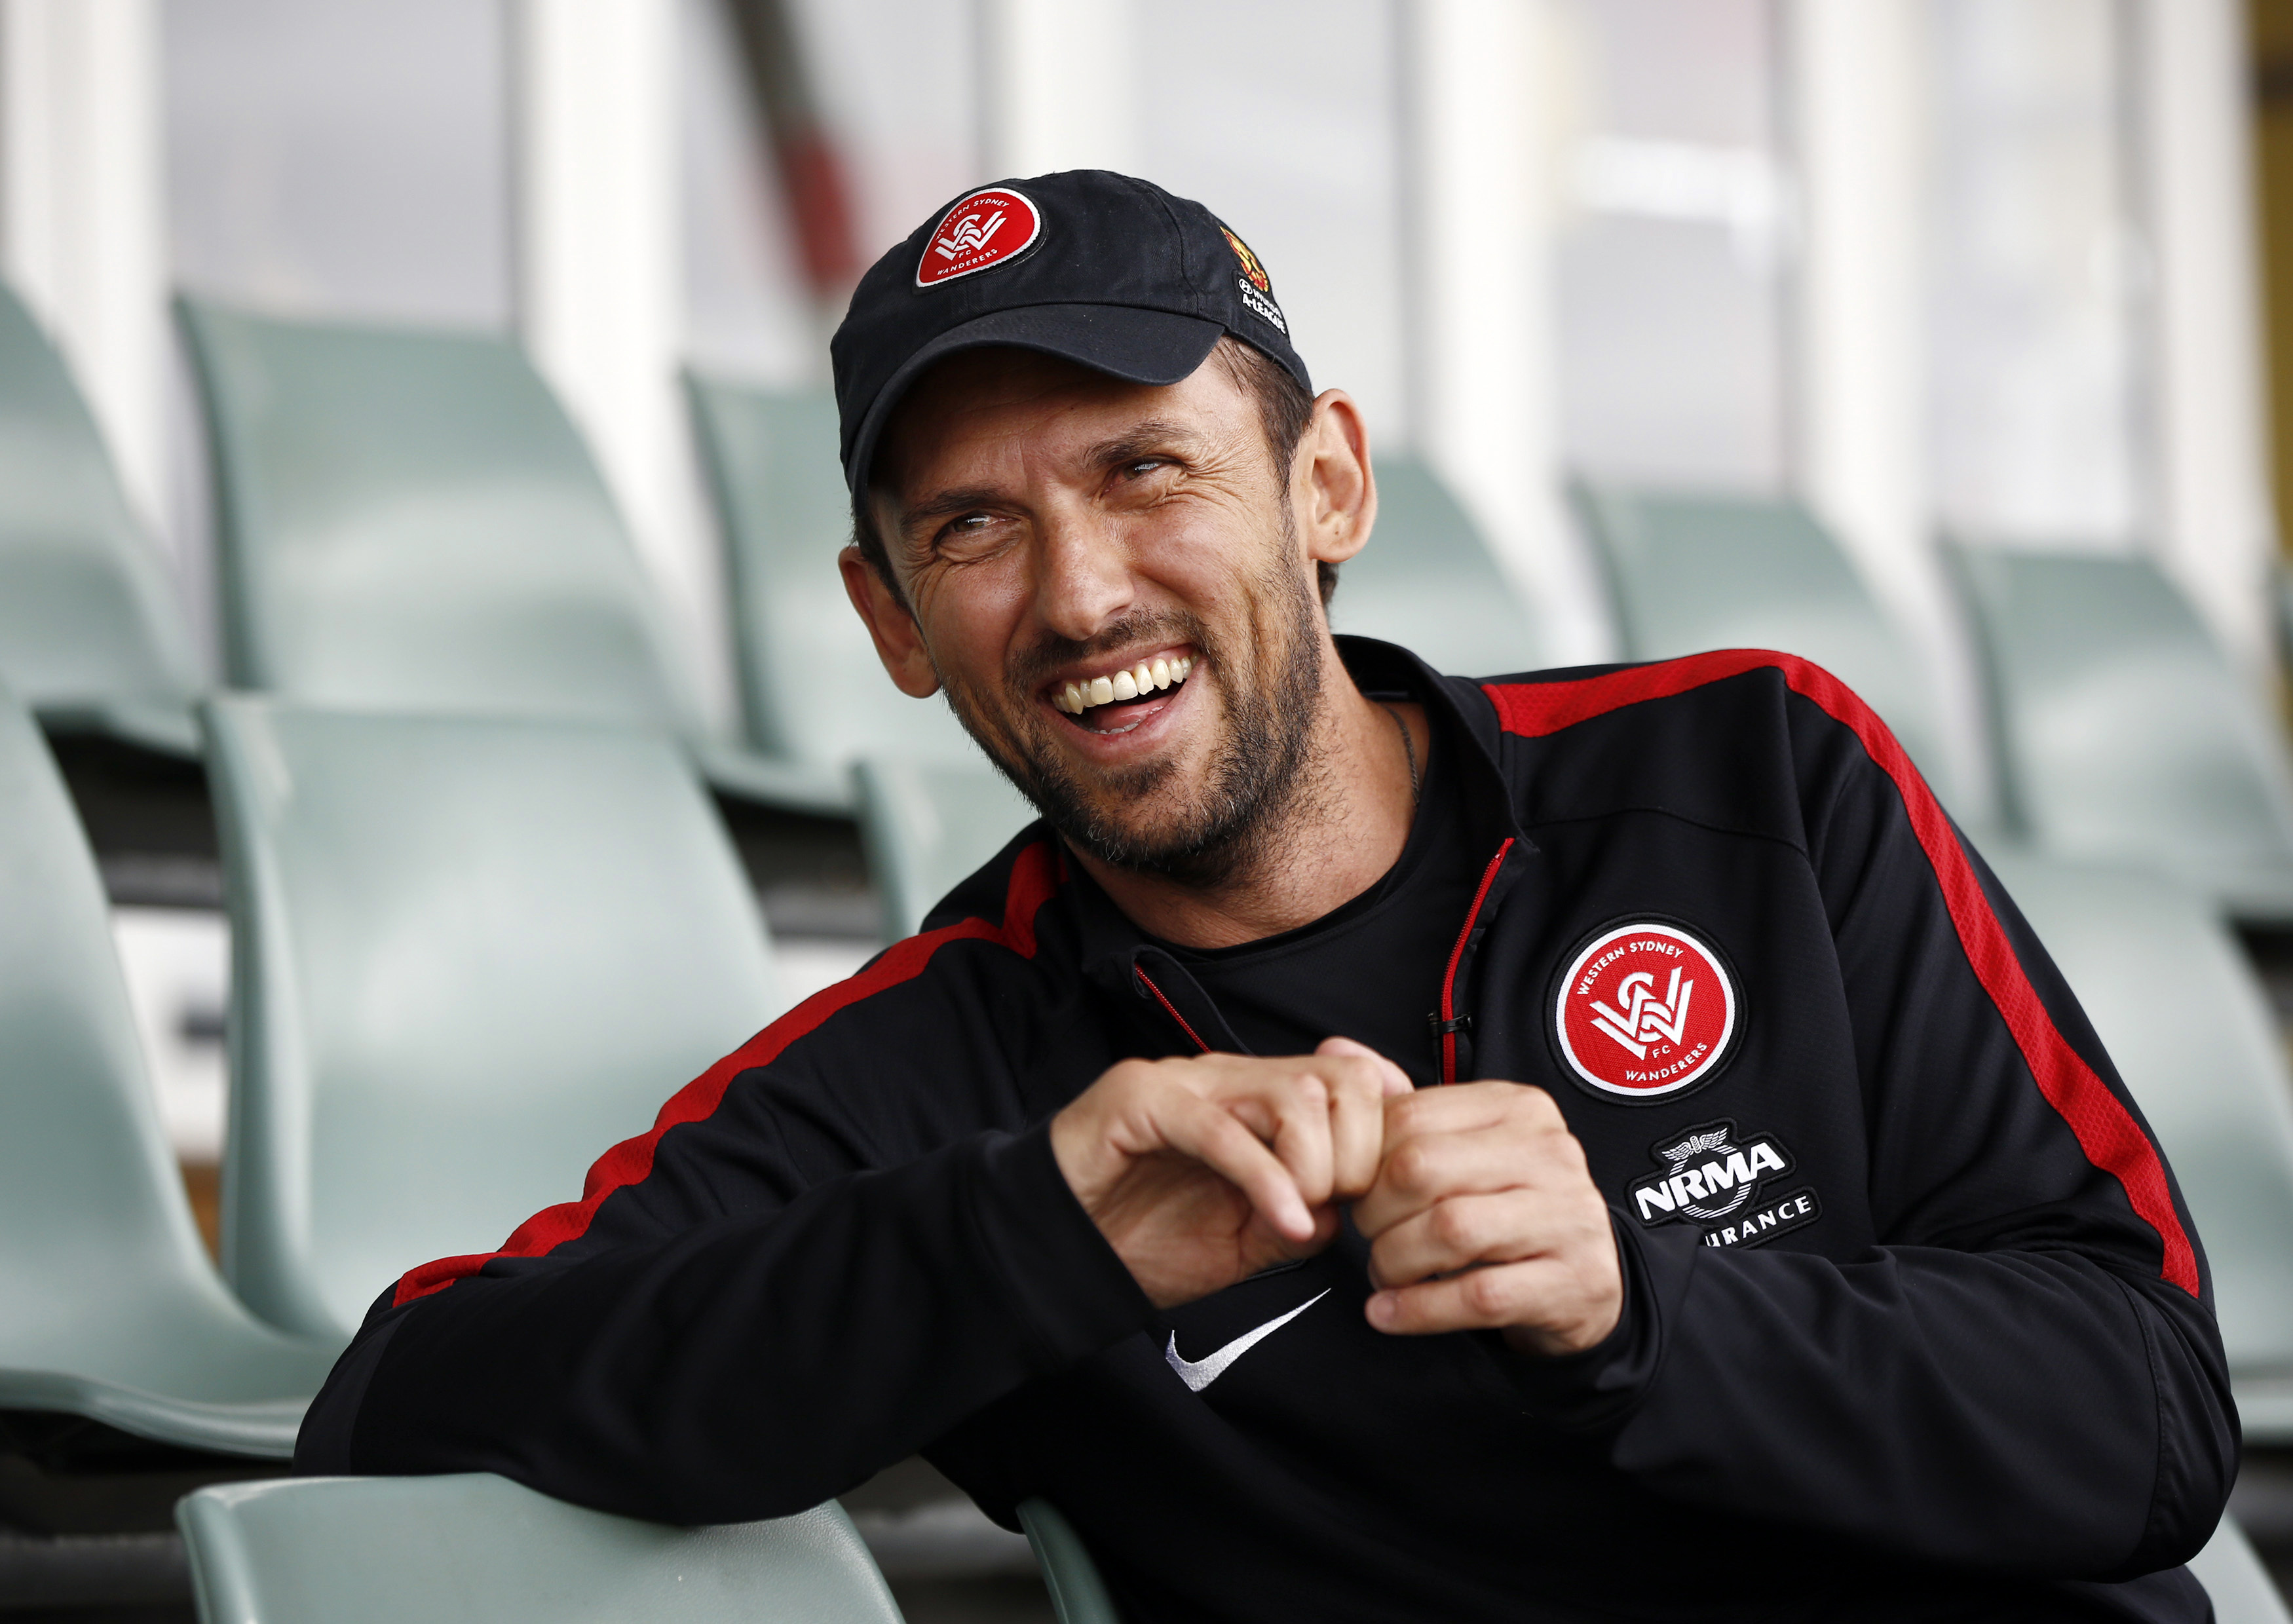 Western Sydney Wanderers soccer team coach Tony Popovic laughs at the team's training facility at Rooty Hill in the western suburbs of Sydney